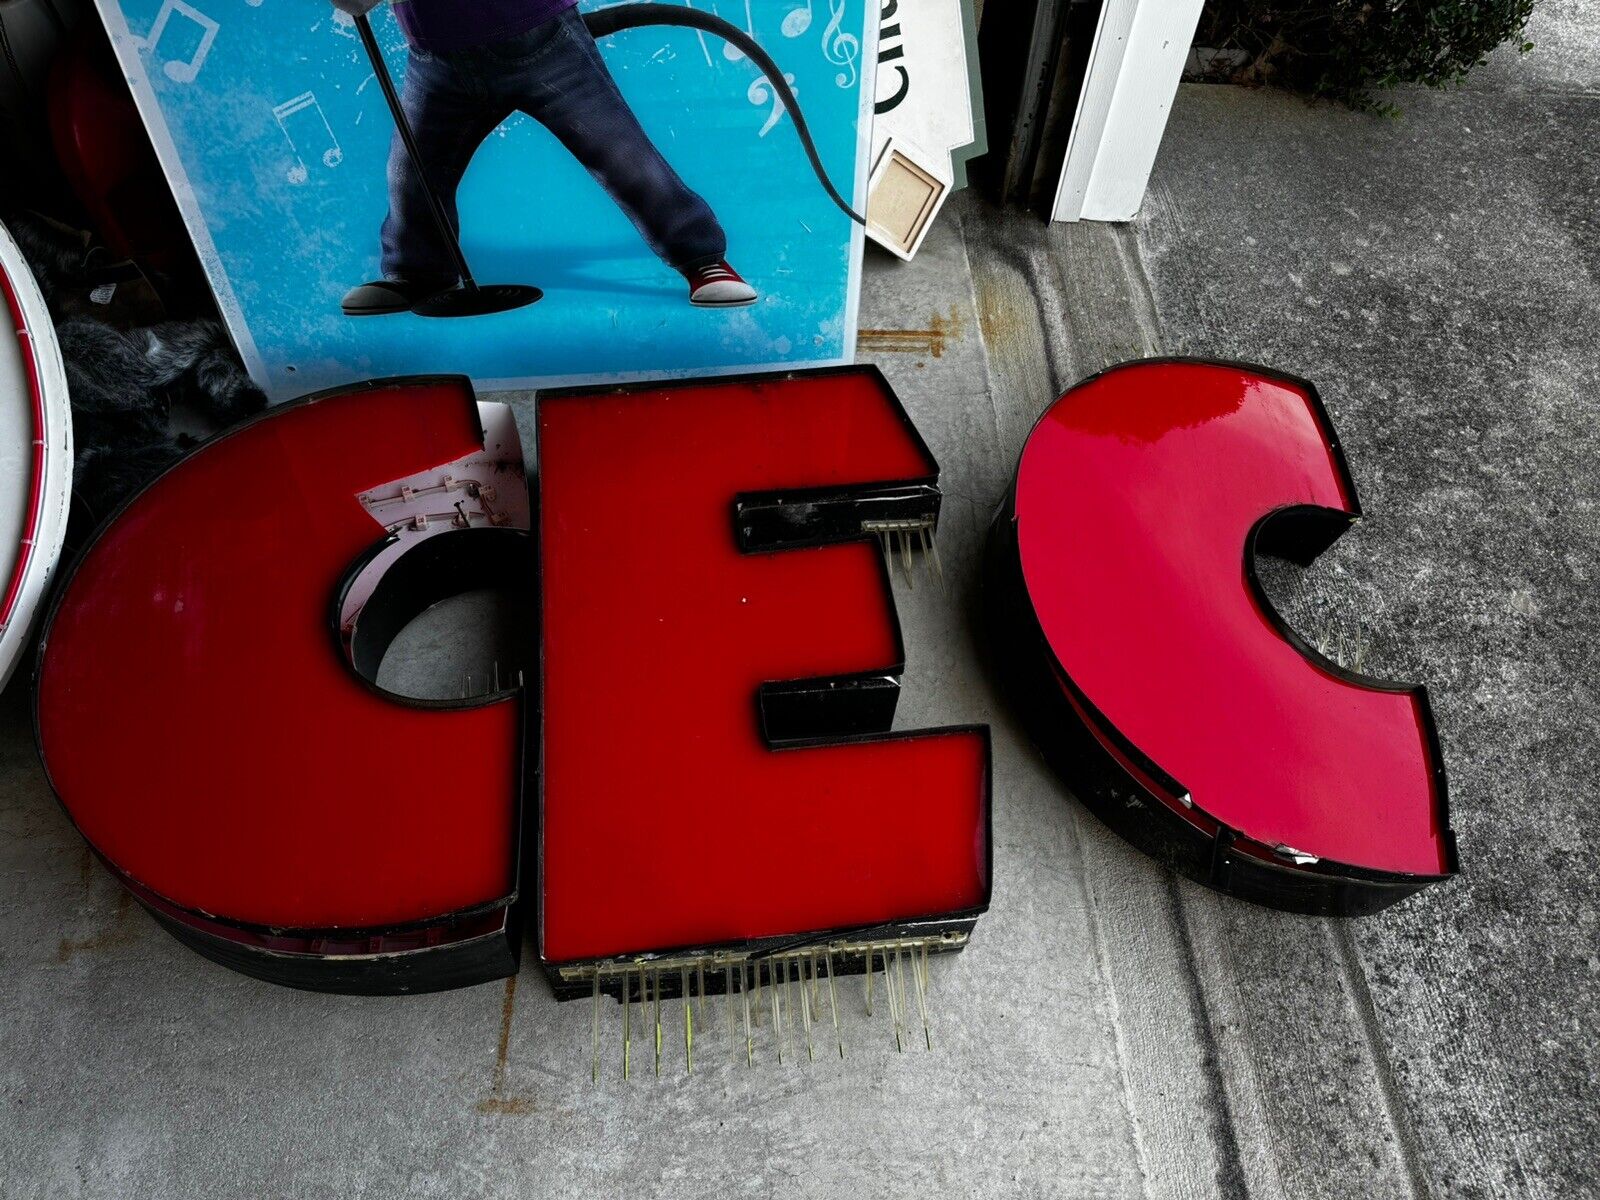 Chuck E. Cheese’s Exterior Retail Sign Lettering “CEC”